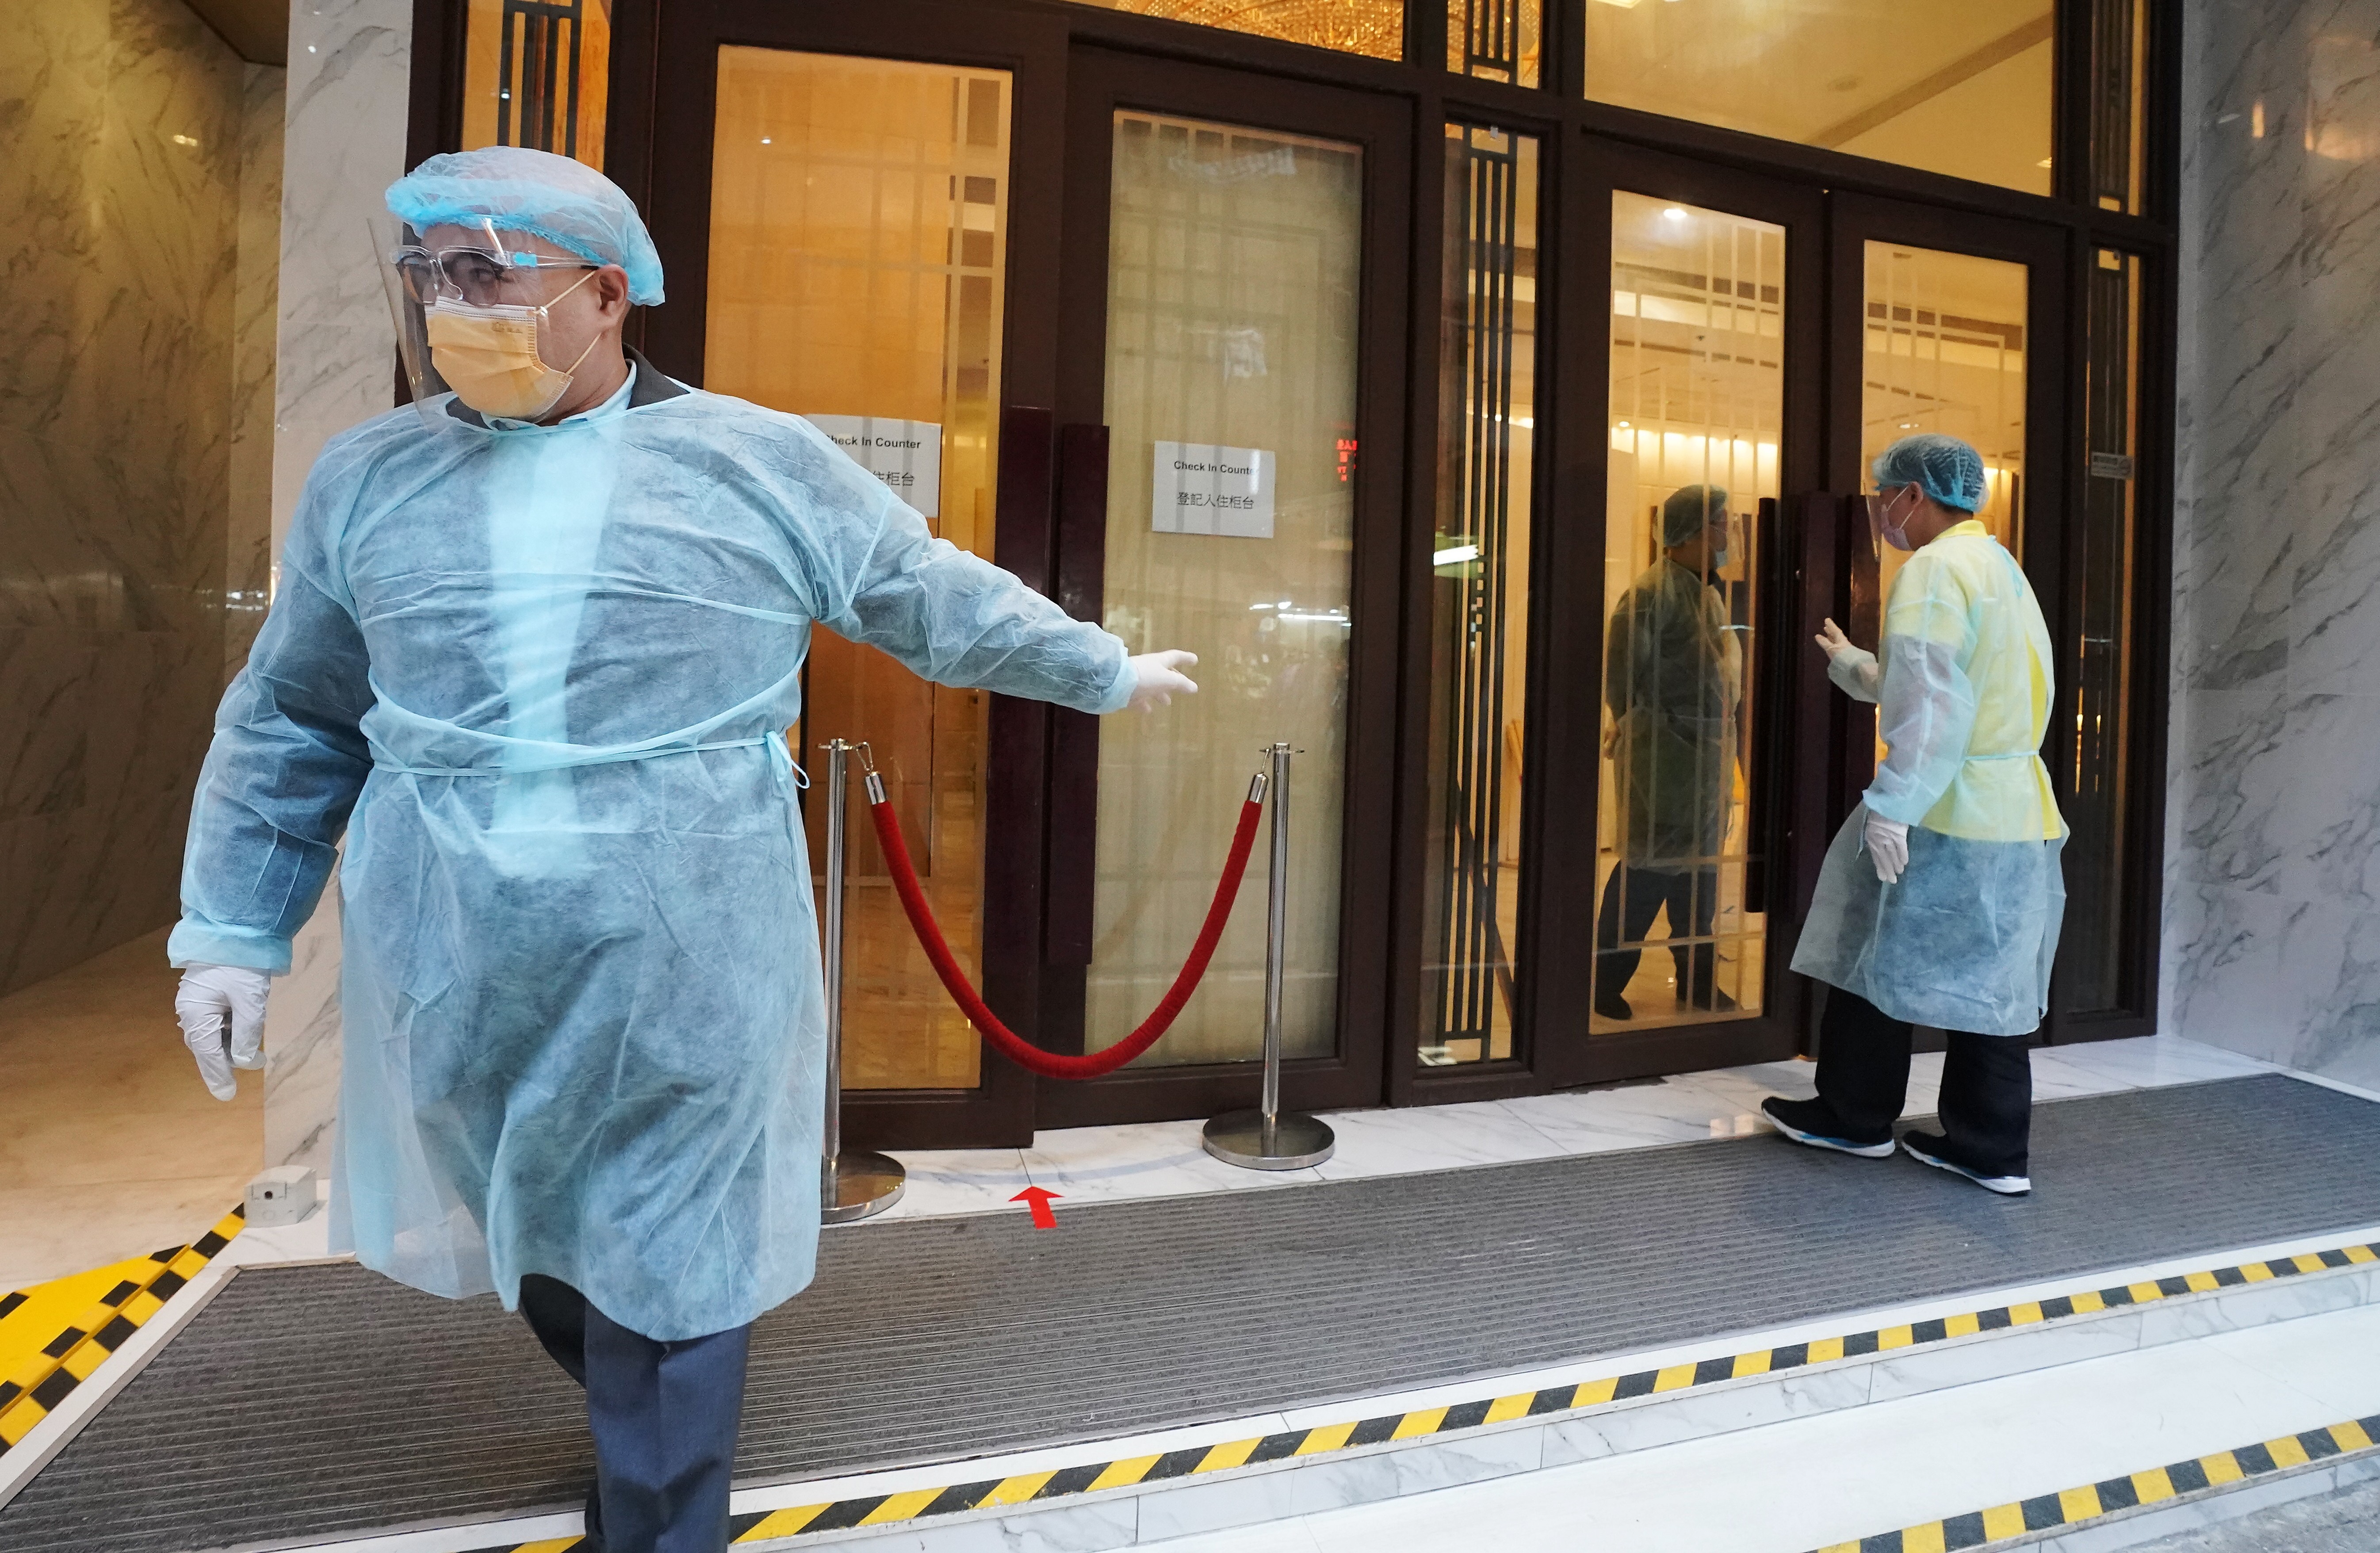 Hong Kong’s three-week mandatory quarantine in designated hotels may be causing more pain for arrivals than is necessary. Photo: Felix Wong